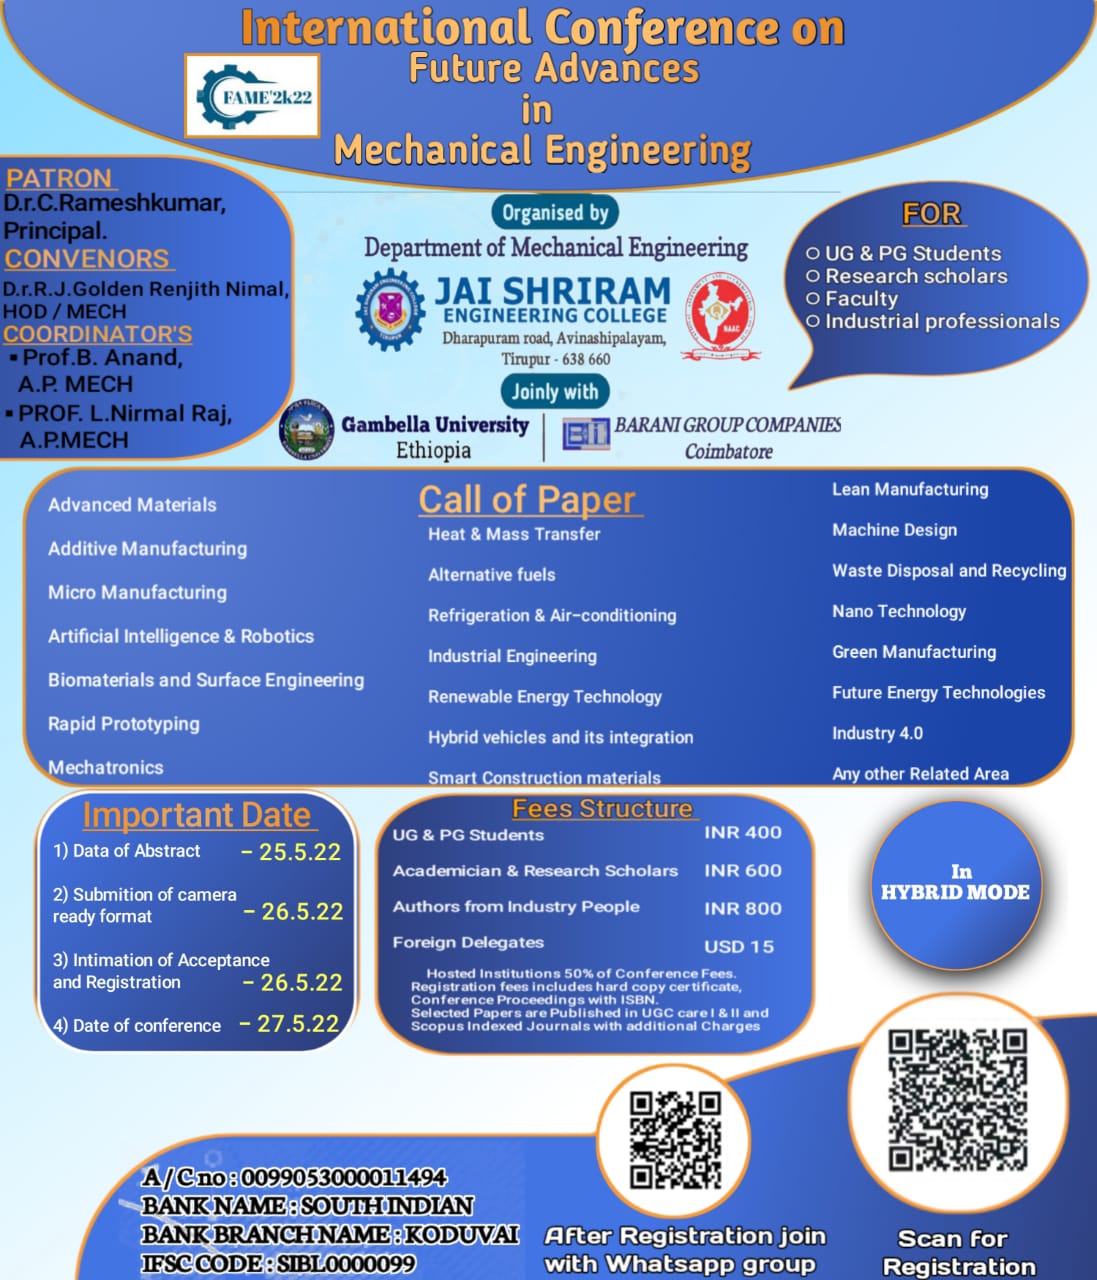 International Conference on Future Advances in Mechanical Engineering (FAME 2k22)